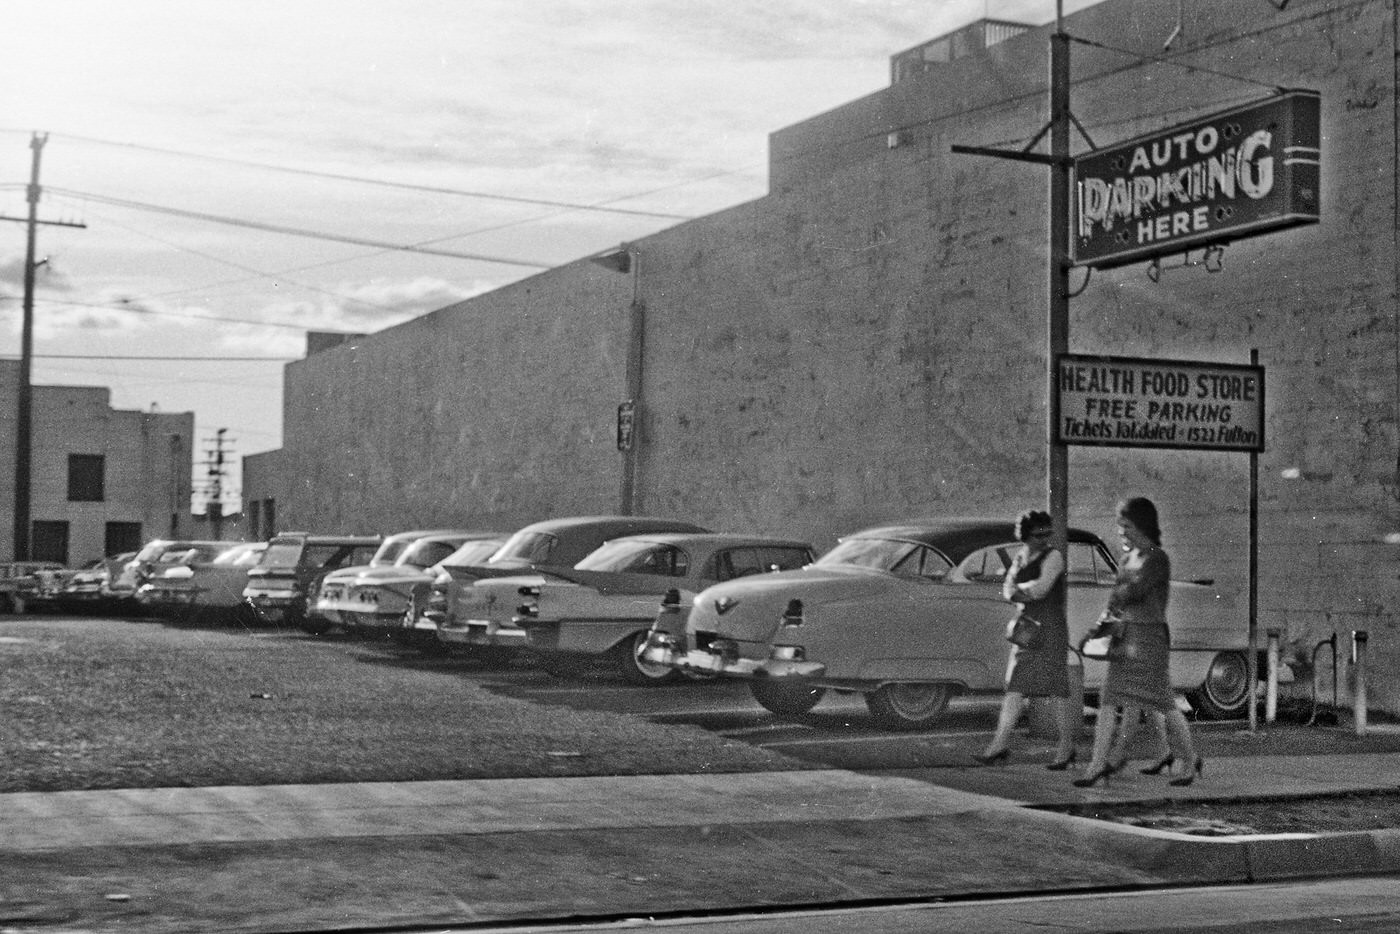 Somewhere northwest of old downtown Fresno. Address on sign for the Health Food Store reads 1522 Fulton.